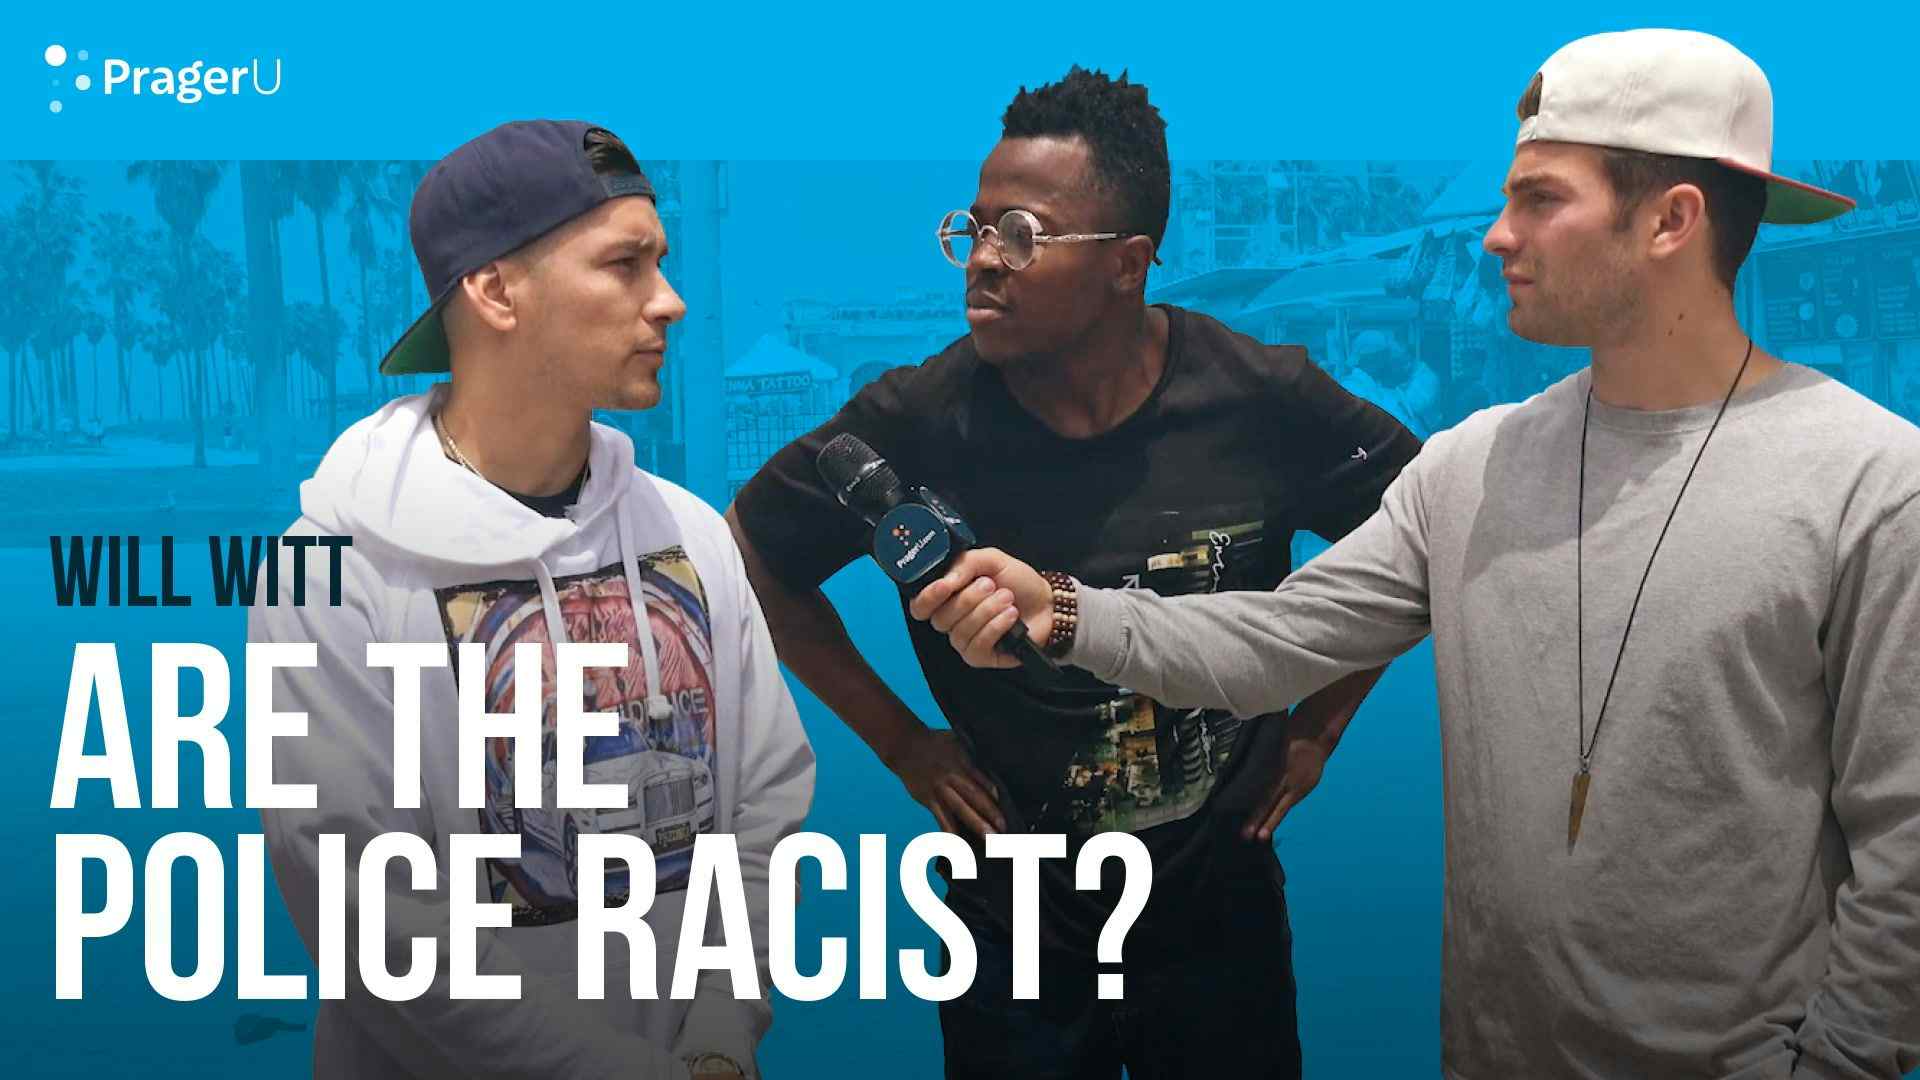 Are the Police Racist?